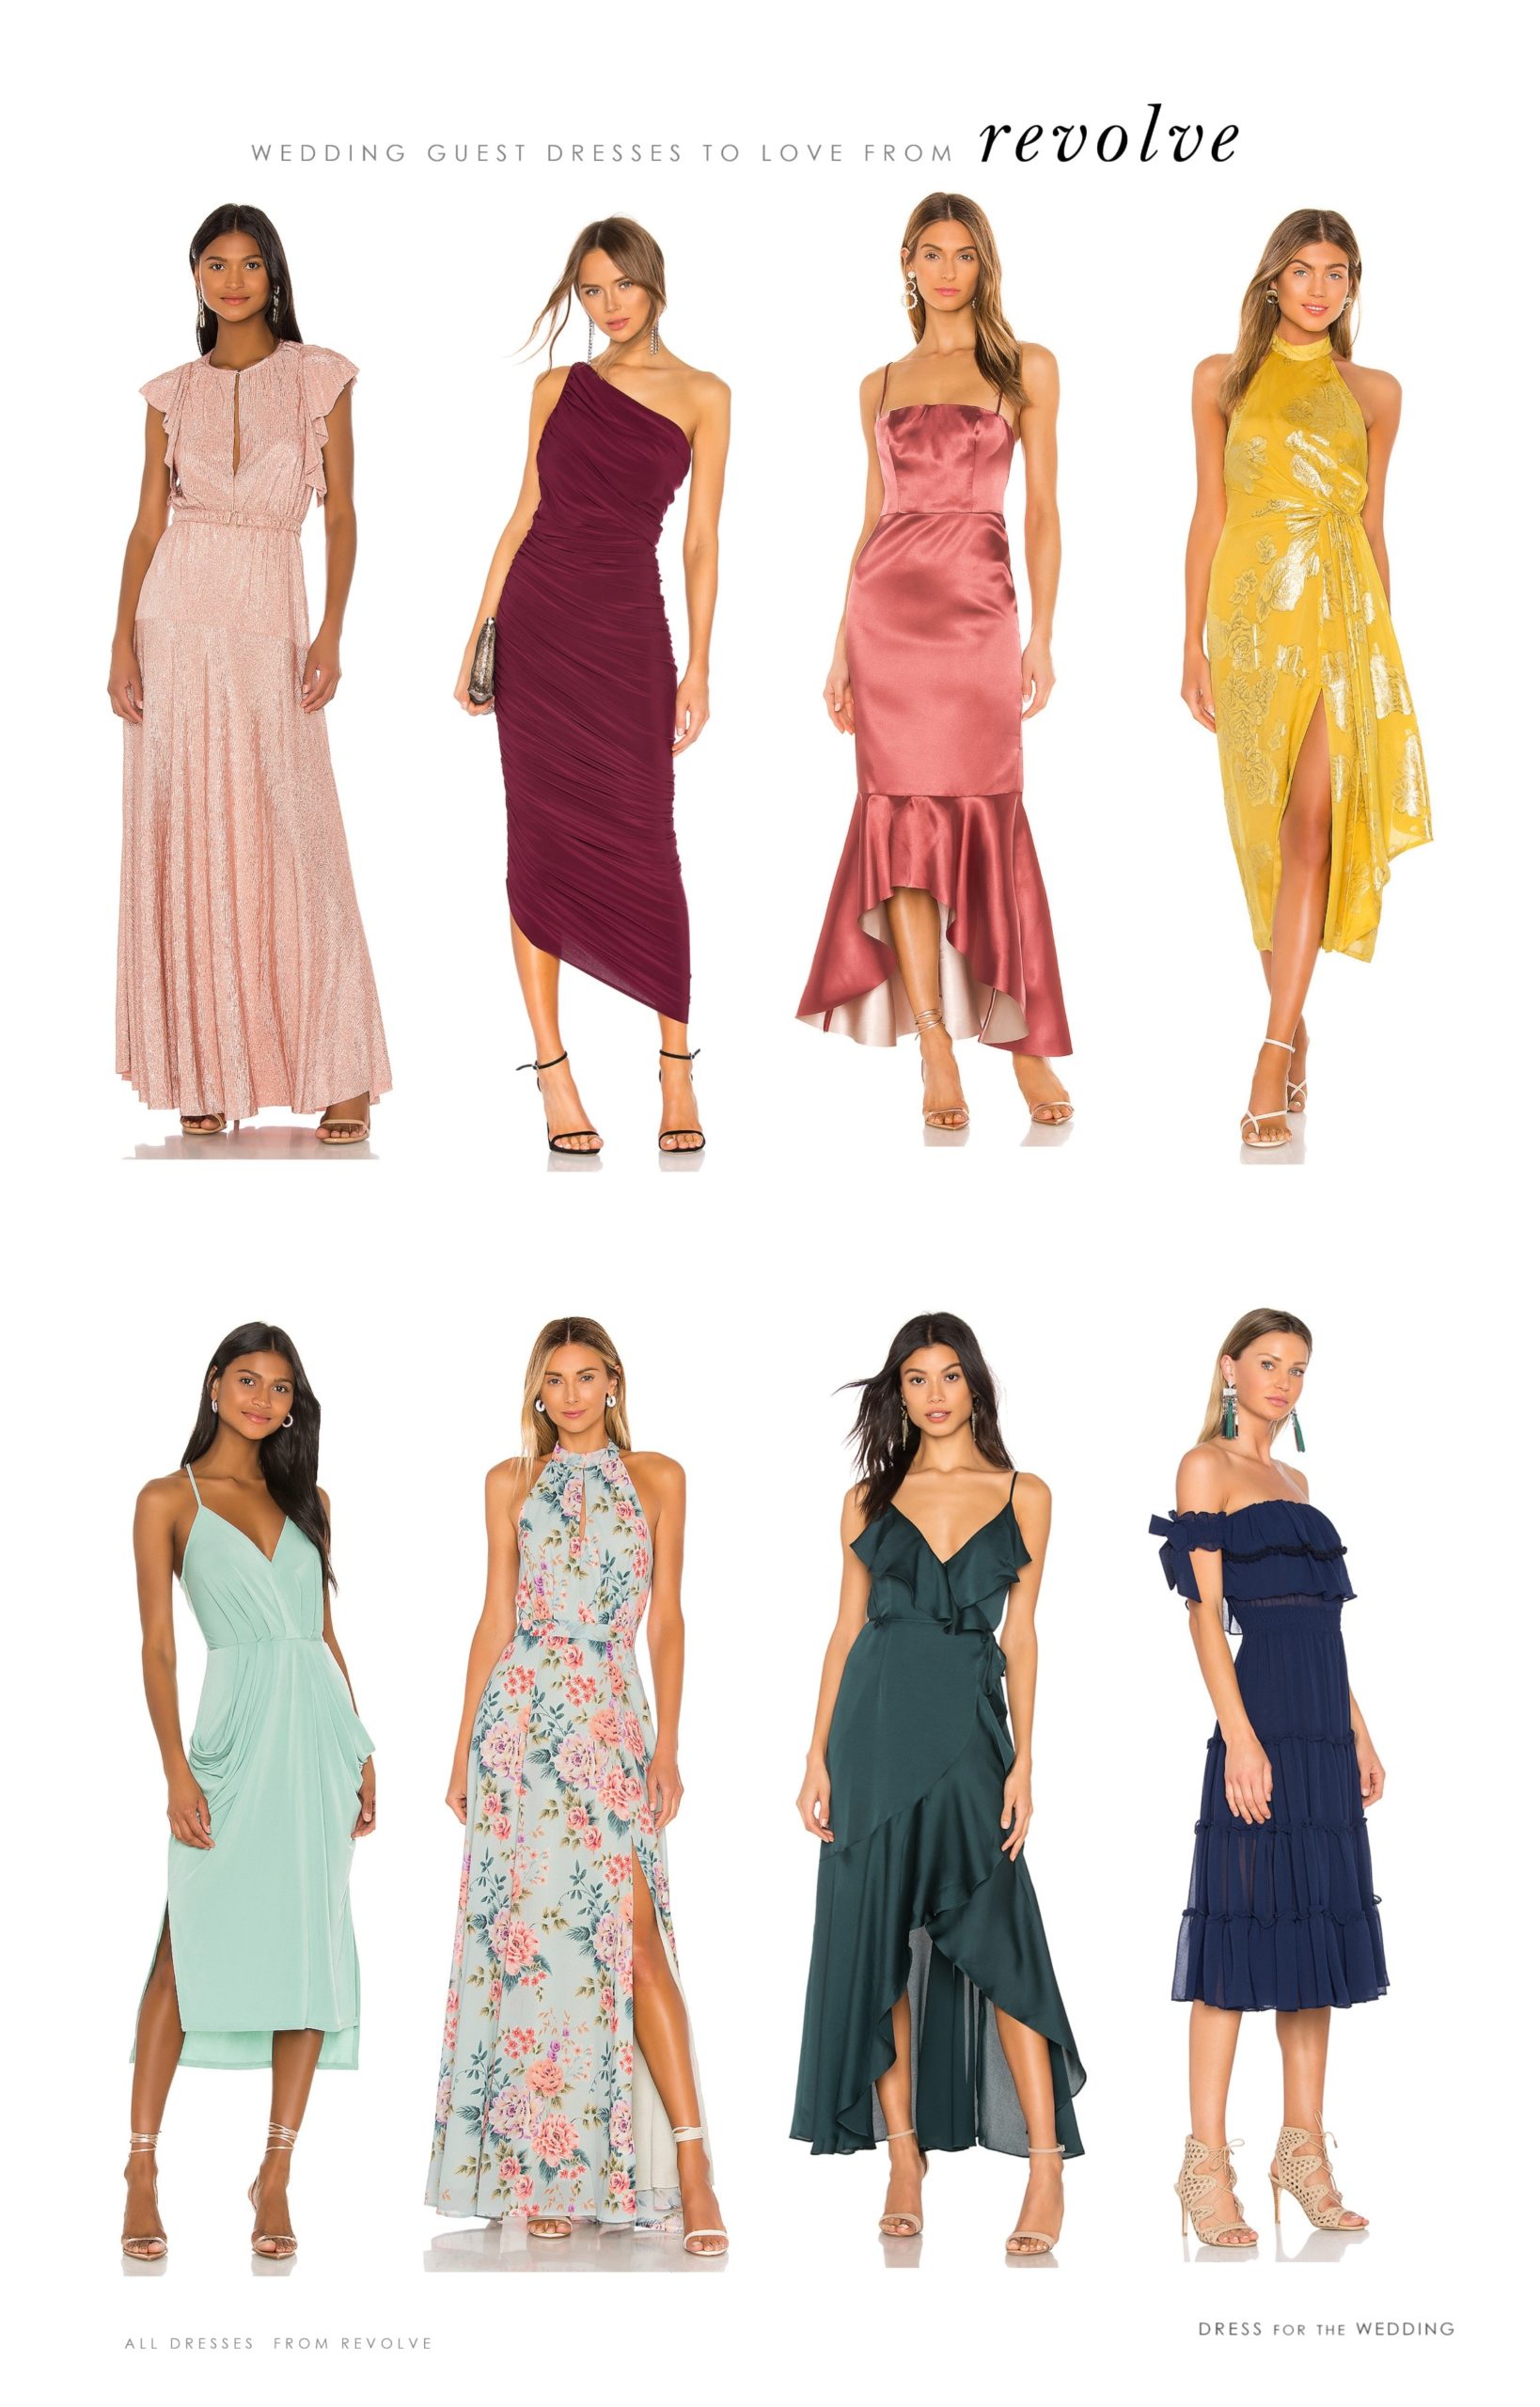 Dresses for Wedding Guests from Revolve Dress for the Wedding